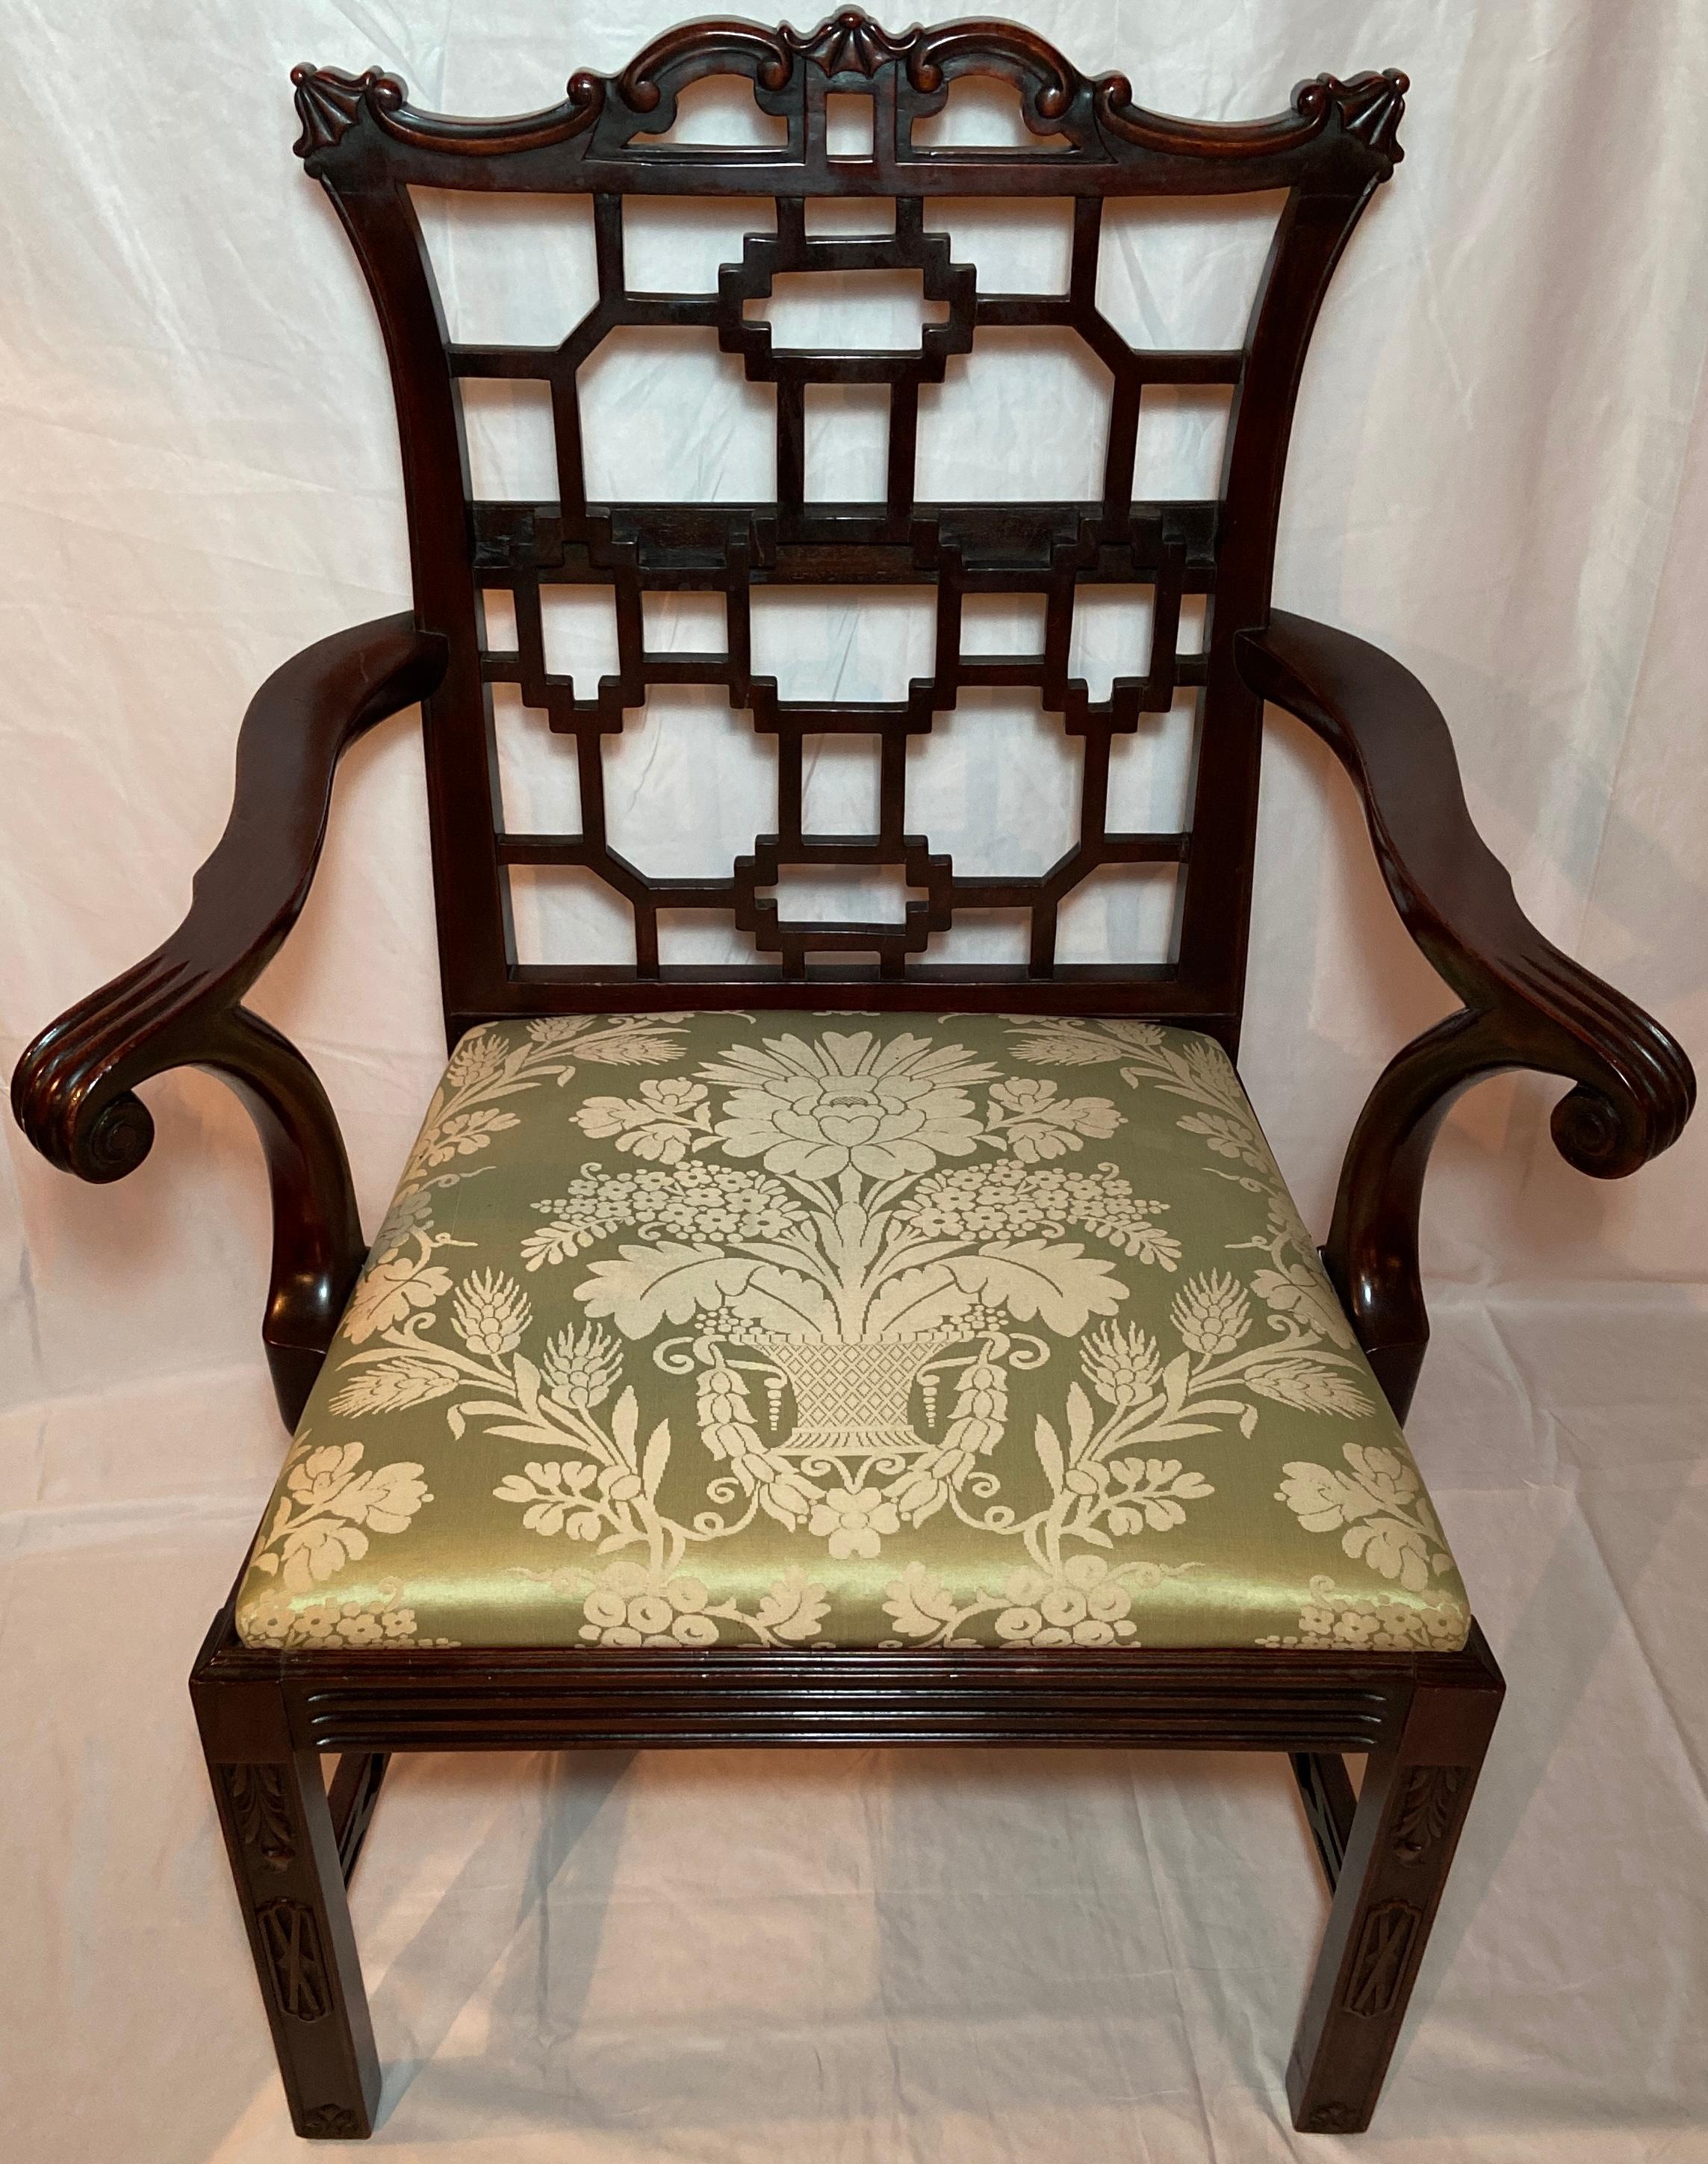 Pair Antique English Chippendale Mahogany Armchairs, circa 1865-1875 In Good Condition For Sale In New Orleans, LA